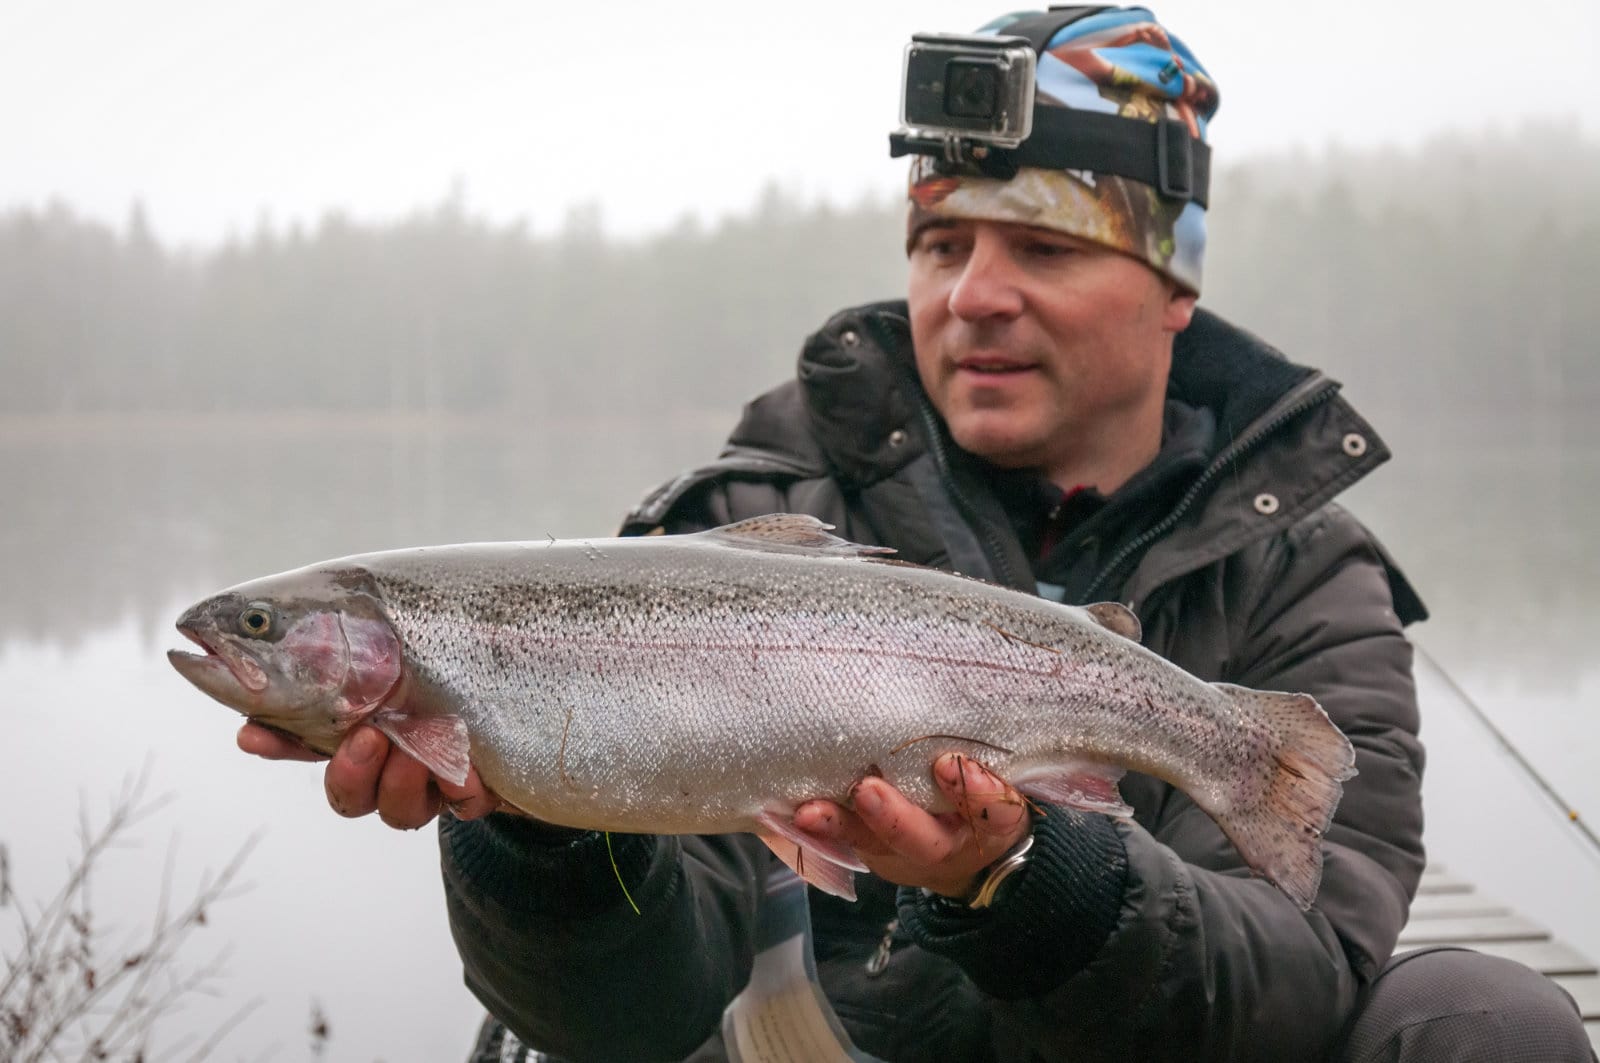 https://www.yellowbirdproducts.com/wp-content/uploads/2021/06/Fishing-For-Steelhead-With-Spinners.jpg